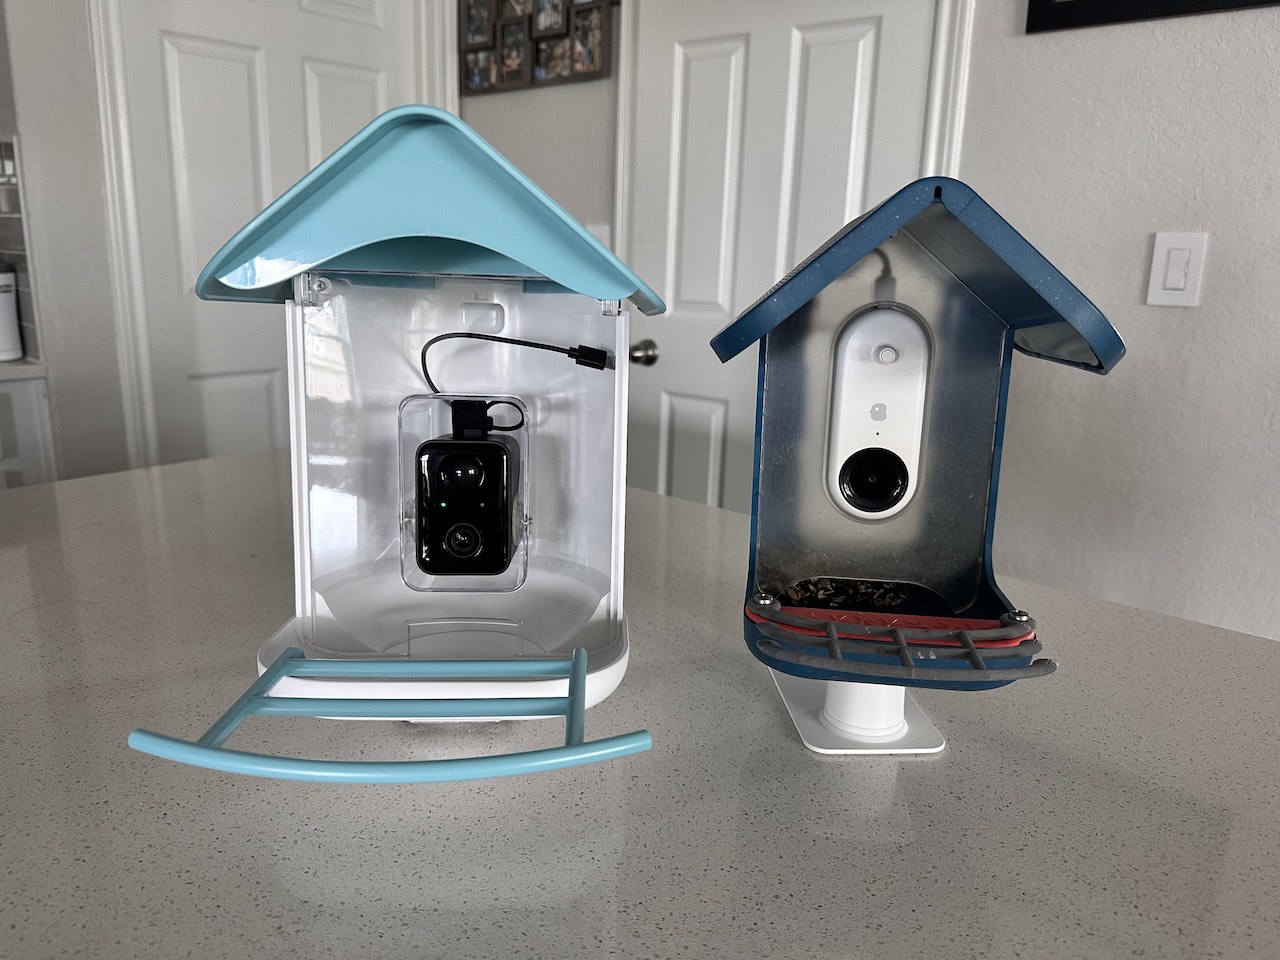 https://becausebirds.com/wp-content/webpc-passthru.php?src=https://becausebirds.com/wp-content/uploads/2023/03/auxco-and-bird-buddy-smart-feeder-side-by-side.jpg&nocache=1